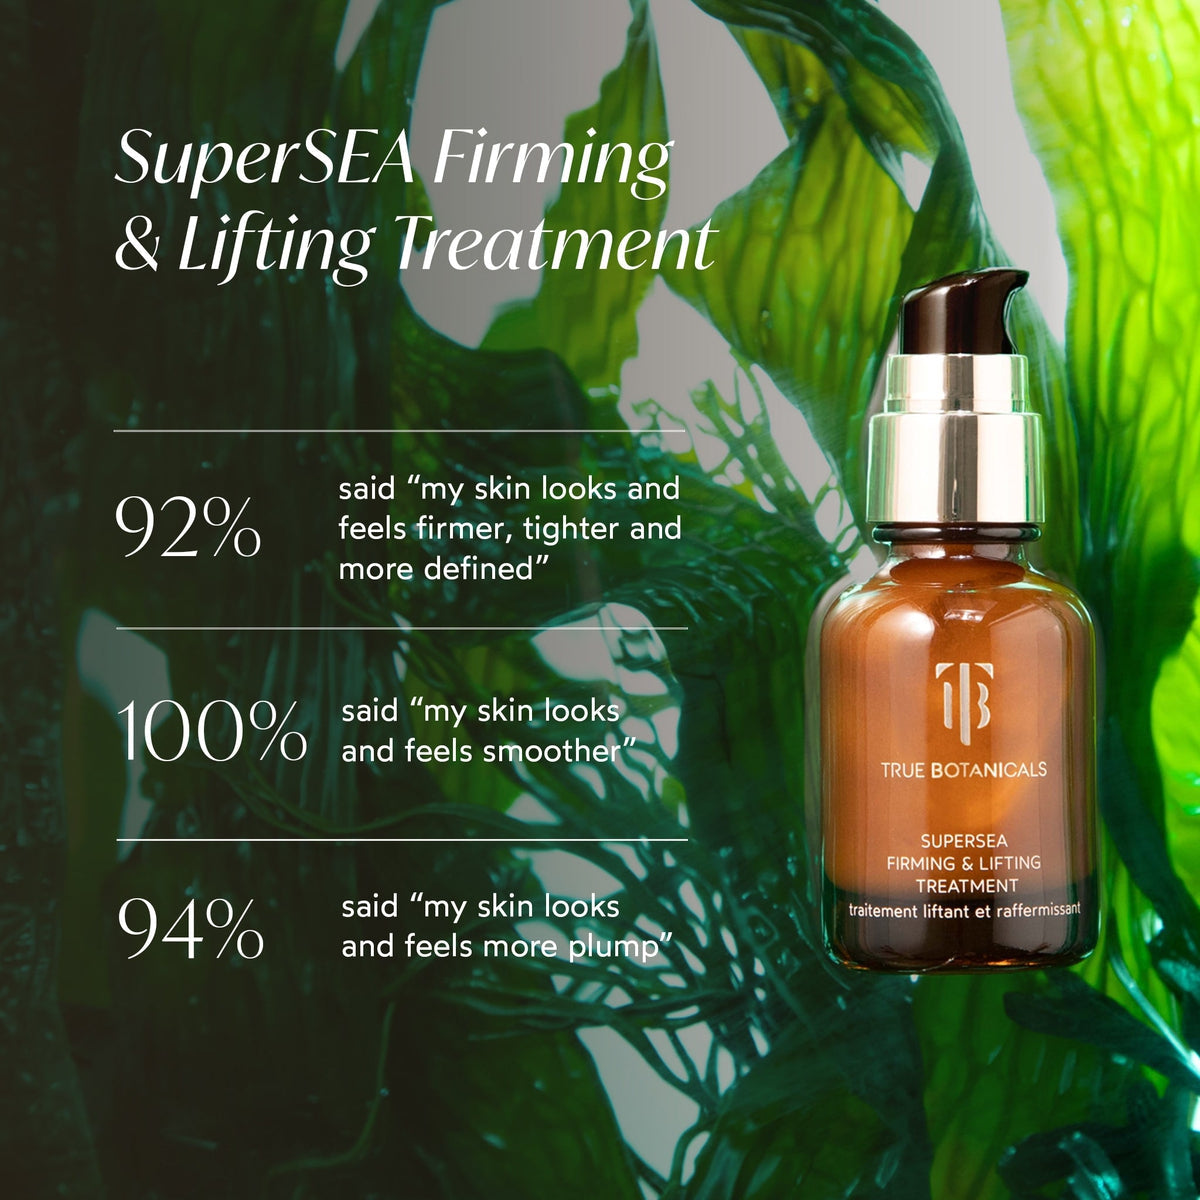 SuperSEA Firming & Lifting Treatment